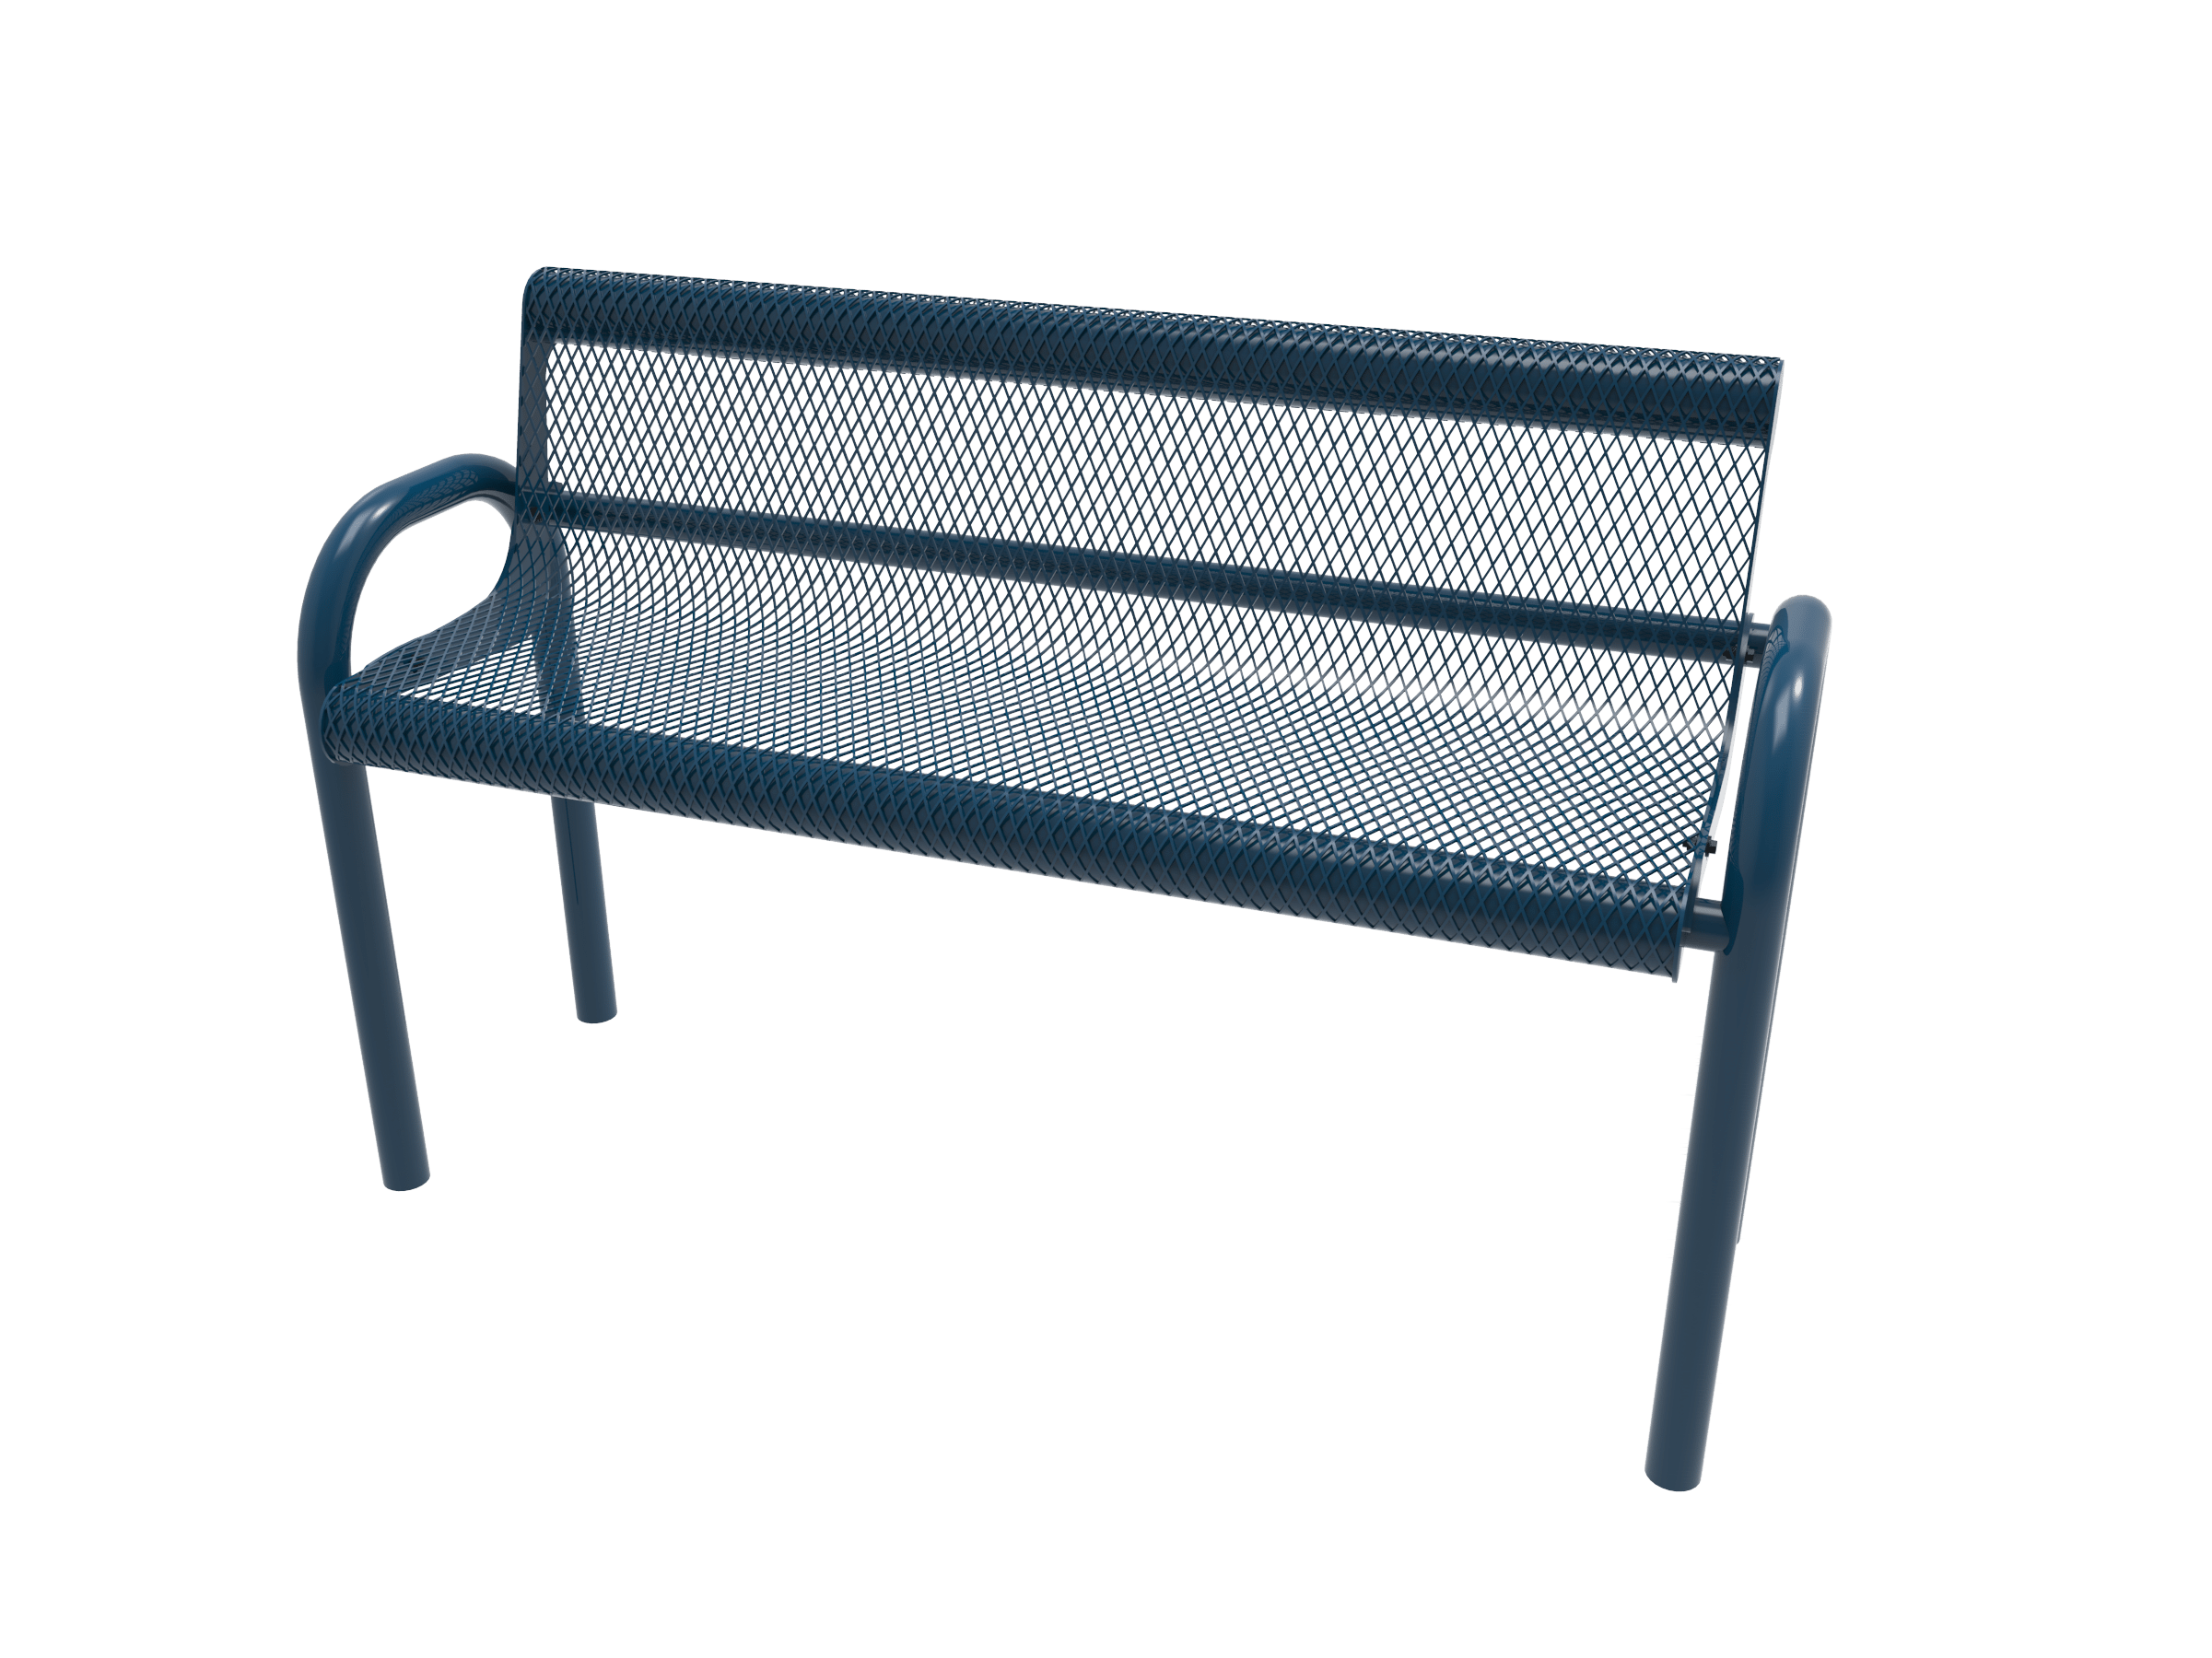 6′ Bench With Back In Ground-Mesh
BMD06-C-53-000
Industry Standard Finish
$1019.00
BMD06-A-53-000
Advantage Premium Finish
$1269.00
